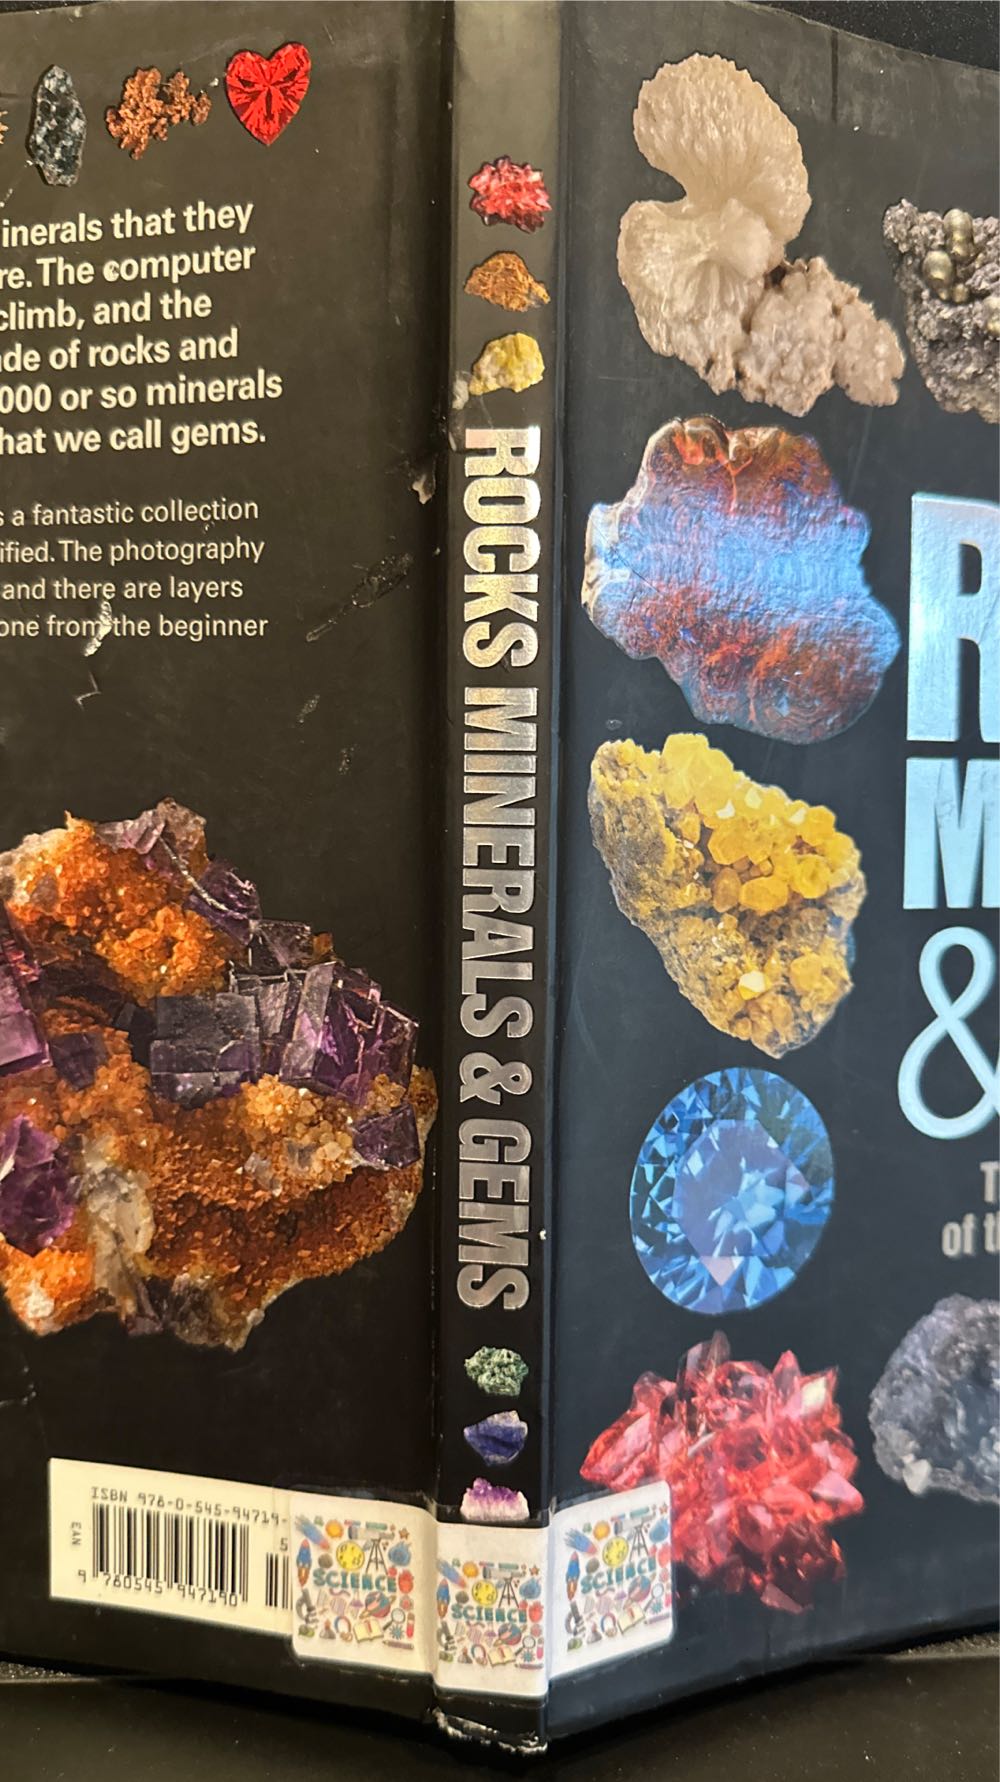 Rocks, Minerals, and Gems - Inc. Scholastic (Scholastic - Paperback) book collectible [Barcode 9780545947190] - Main Image 2